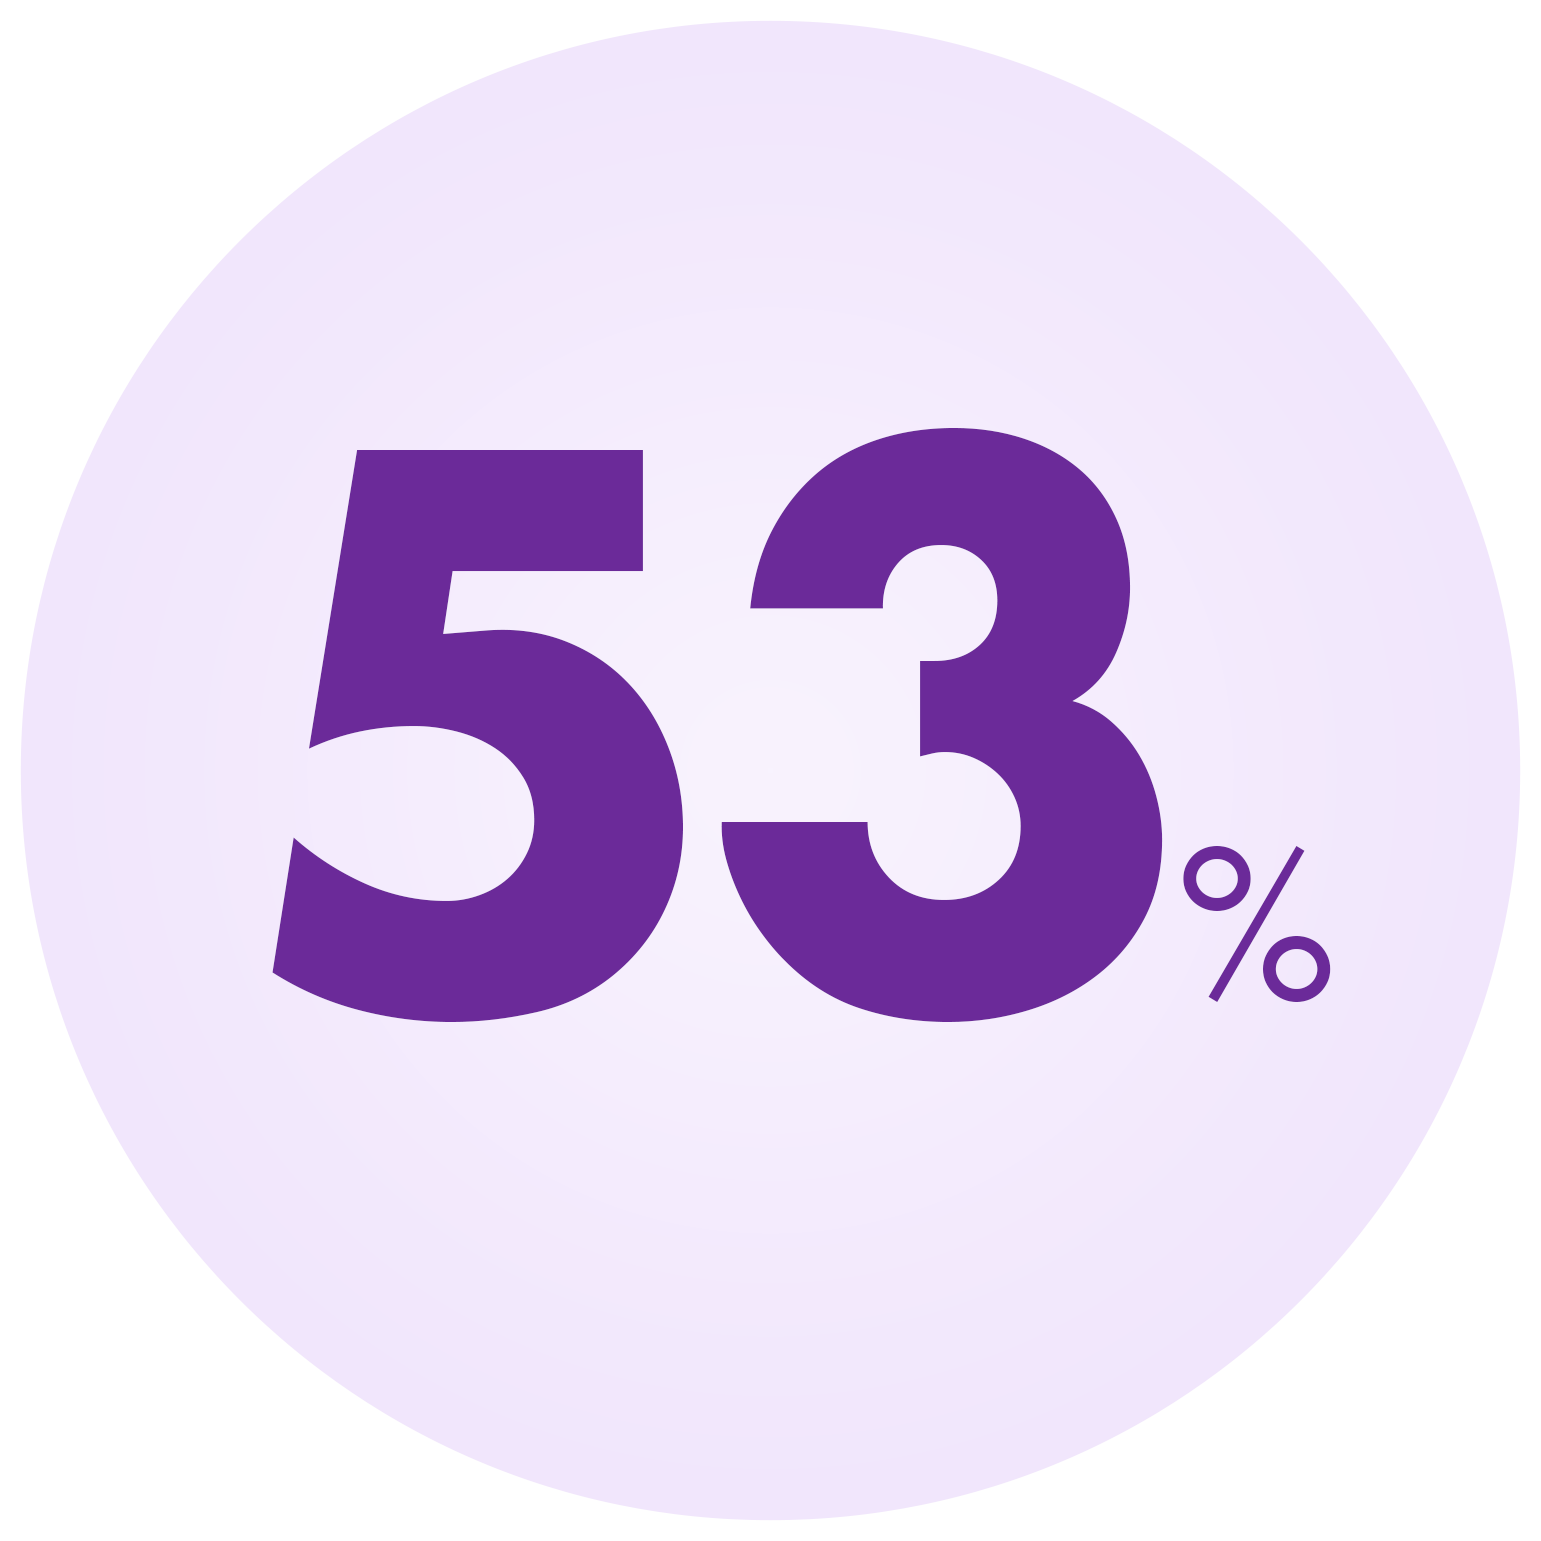 infographic_04_53percent.png